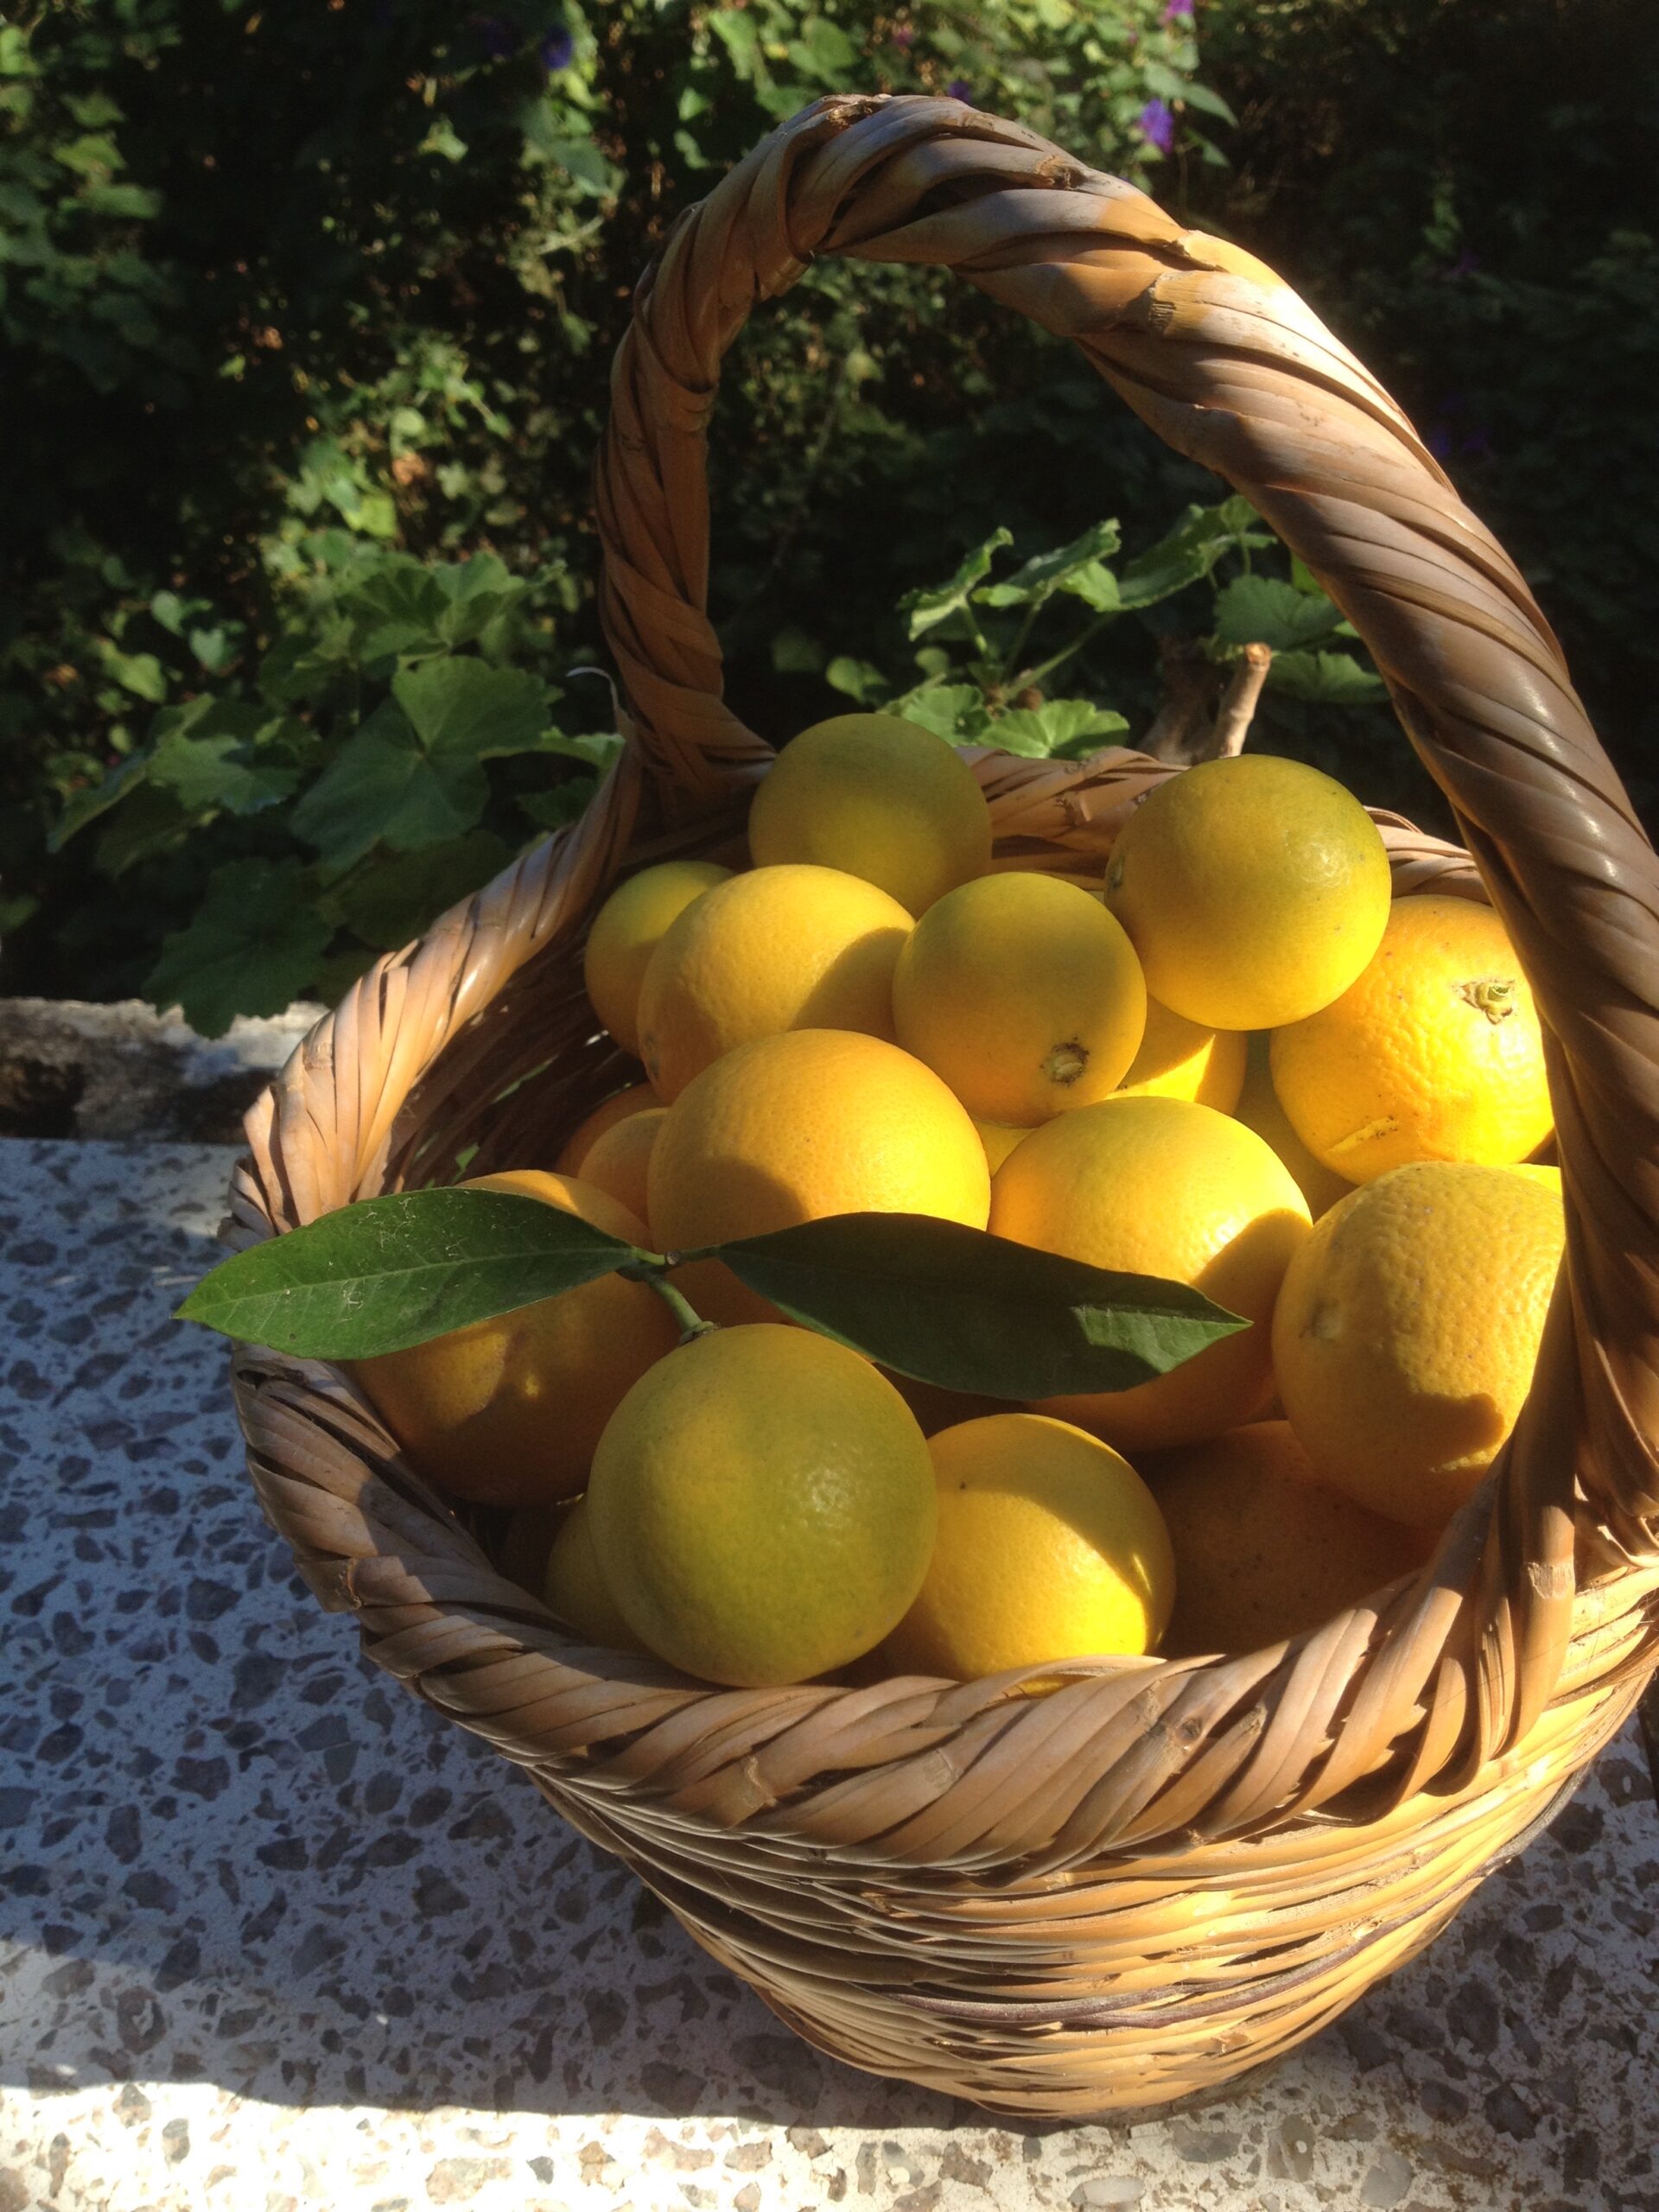 Lemons in a traditional Cypriot basket.